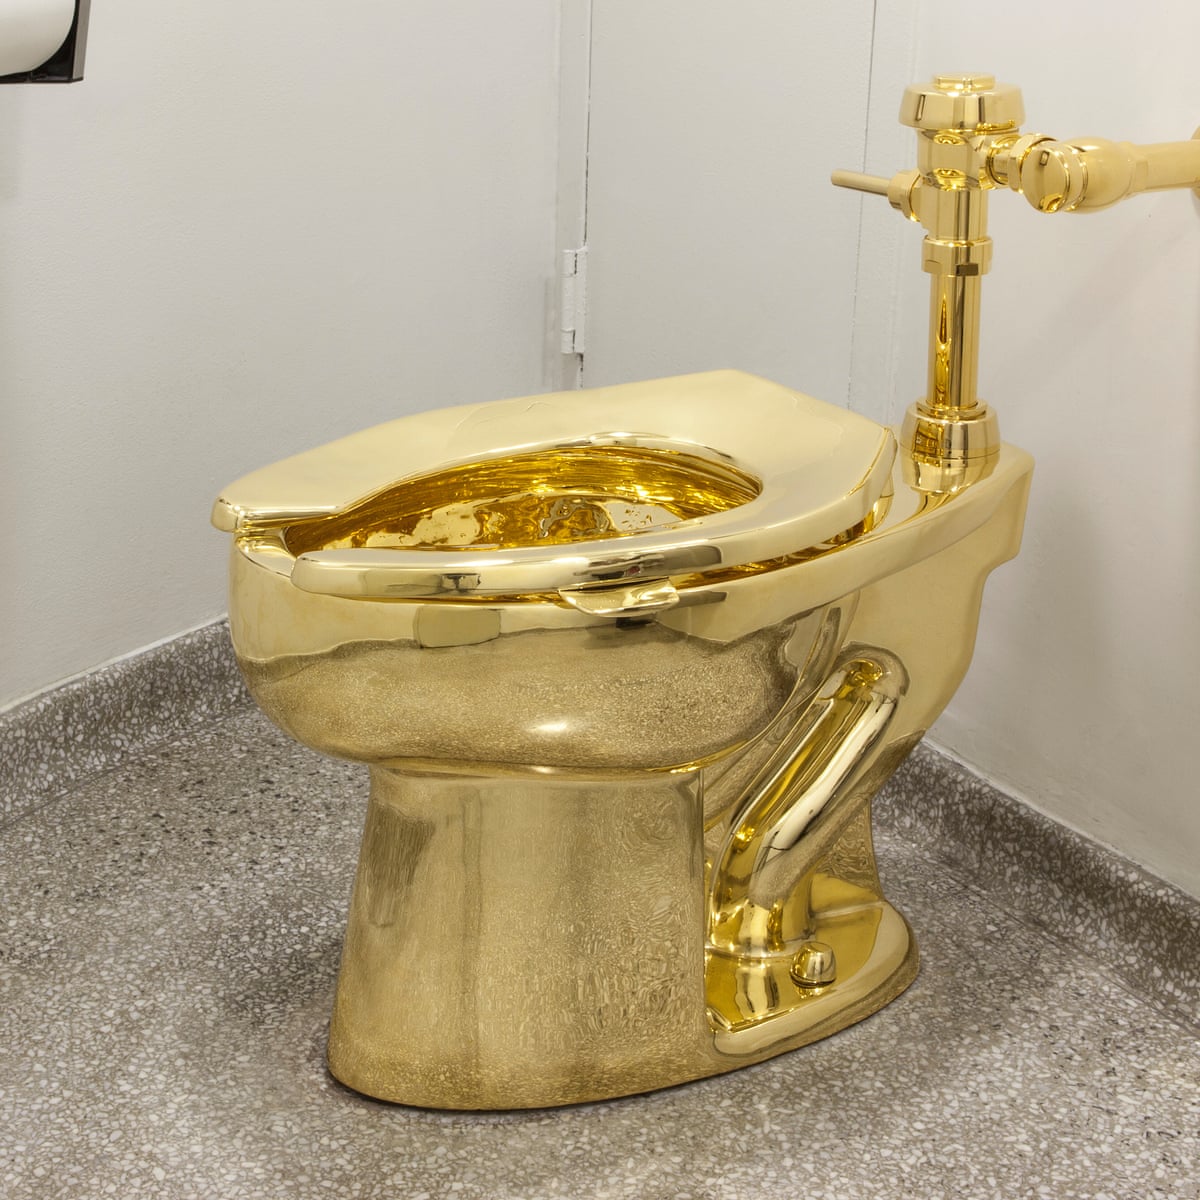 Flushed with success: solid-gold toilet to be installed at